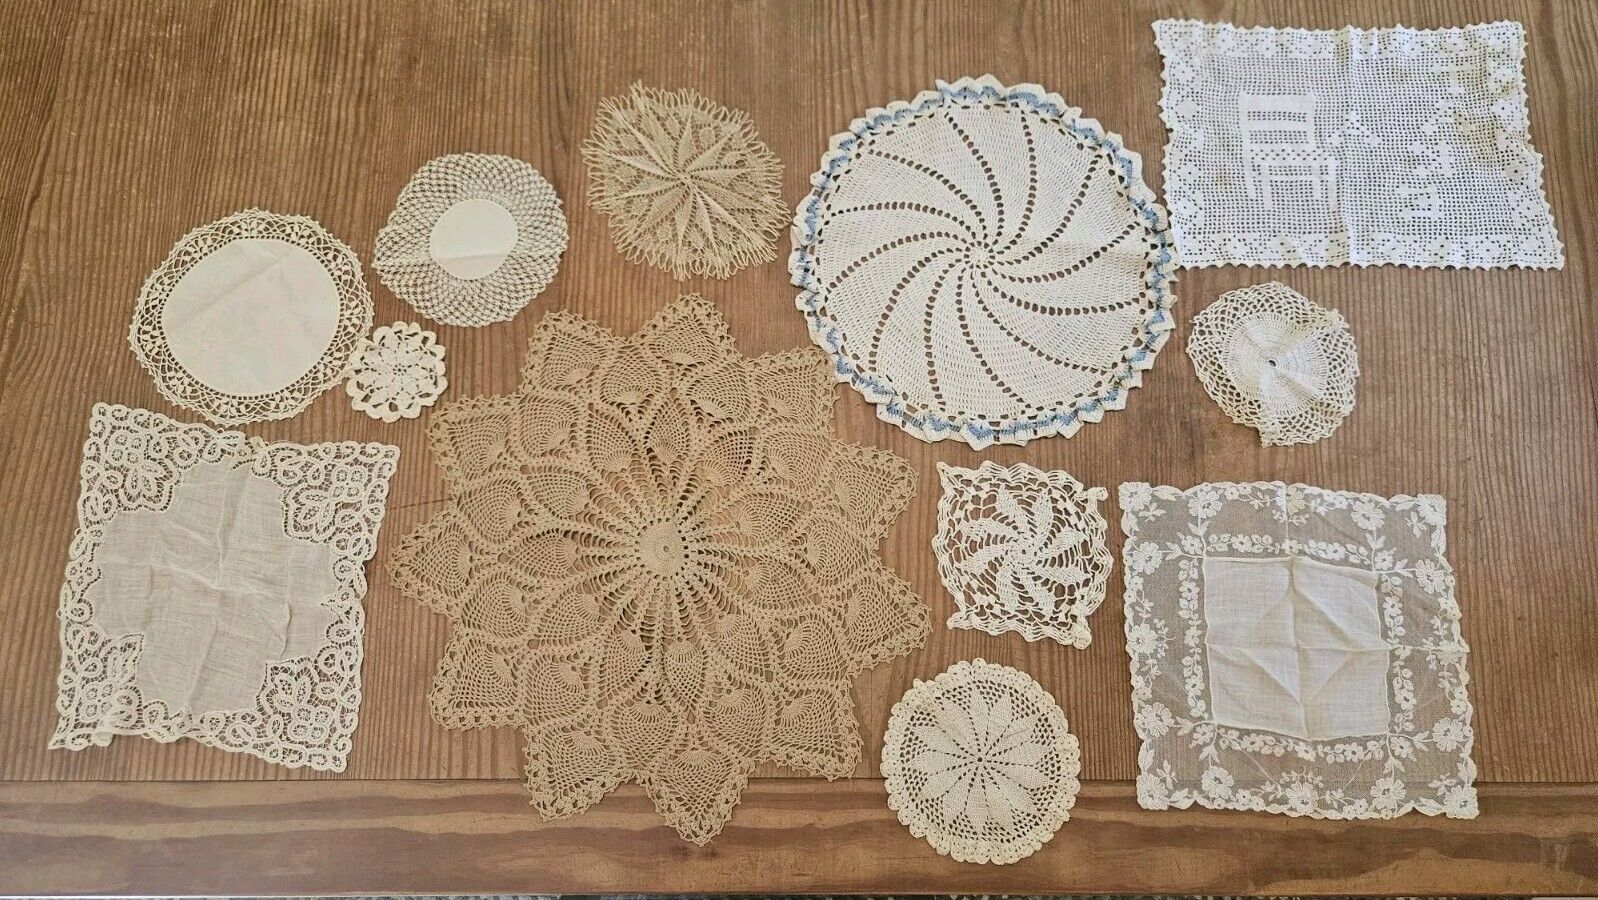 Lot of 12 Vintage Crochet and Lace Doilies Various Sizes